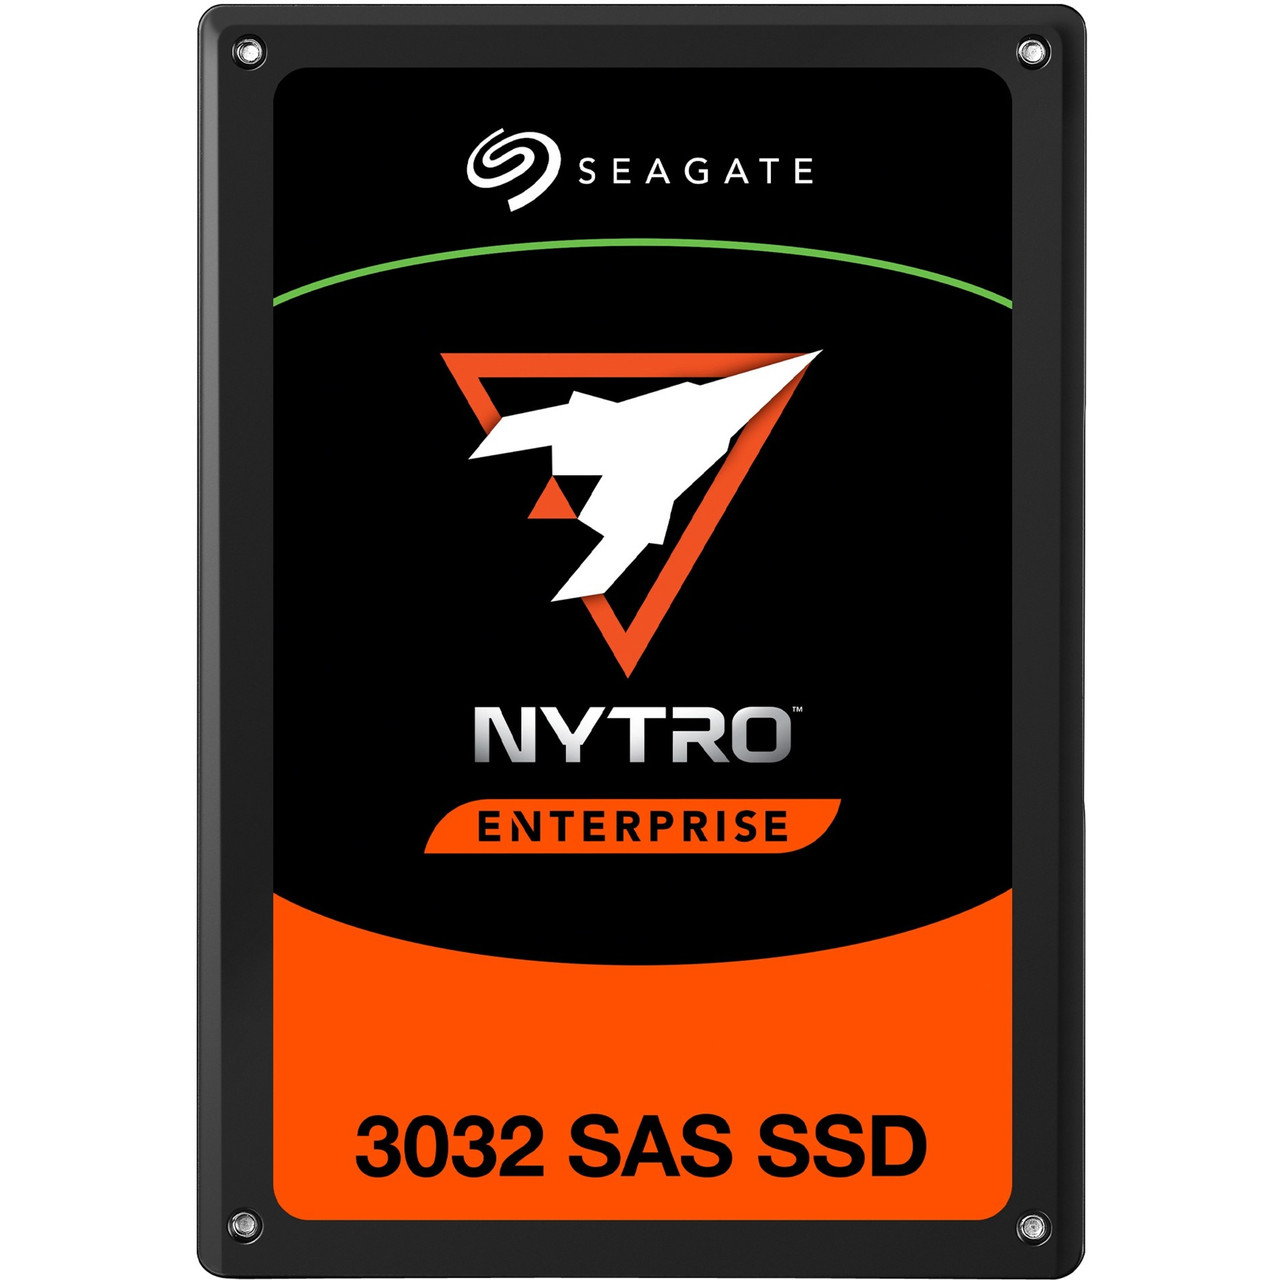 Seagate Nytro 3032 XS1920SE70104 1.92 TB Solid State Drive - 2.5" Internal